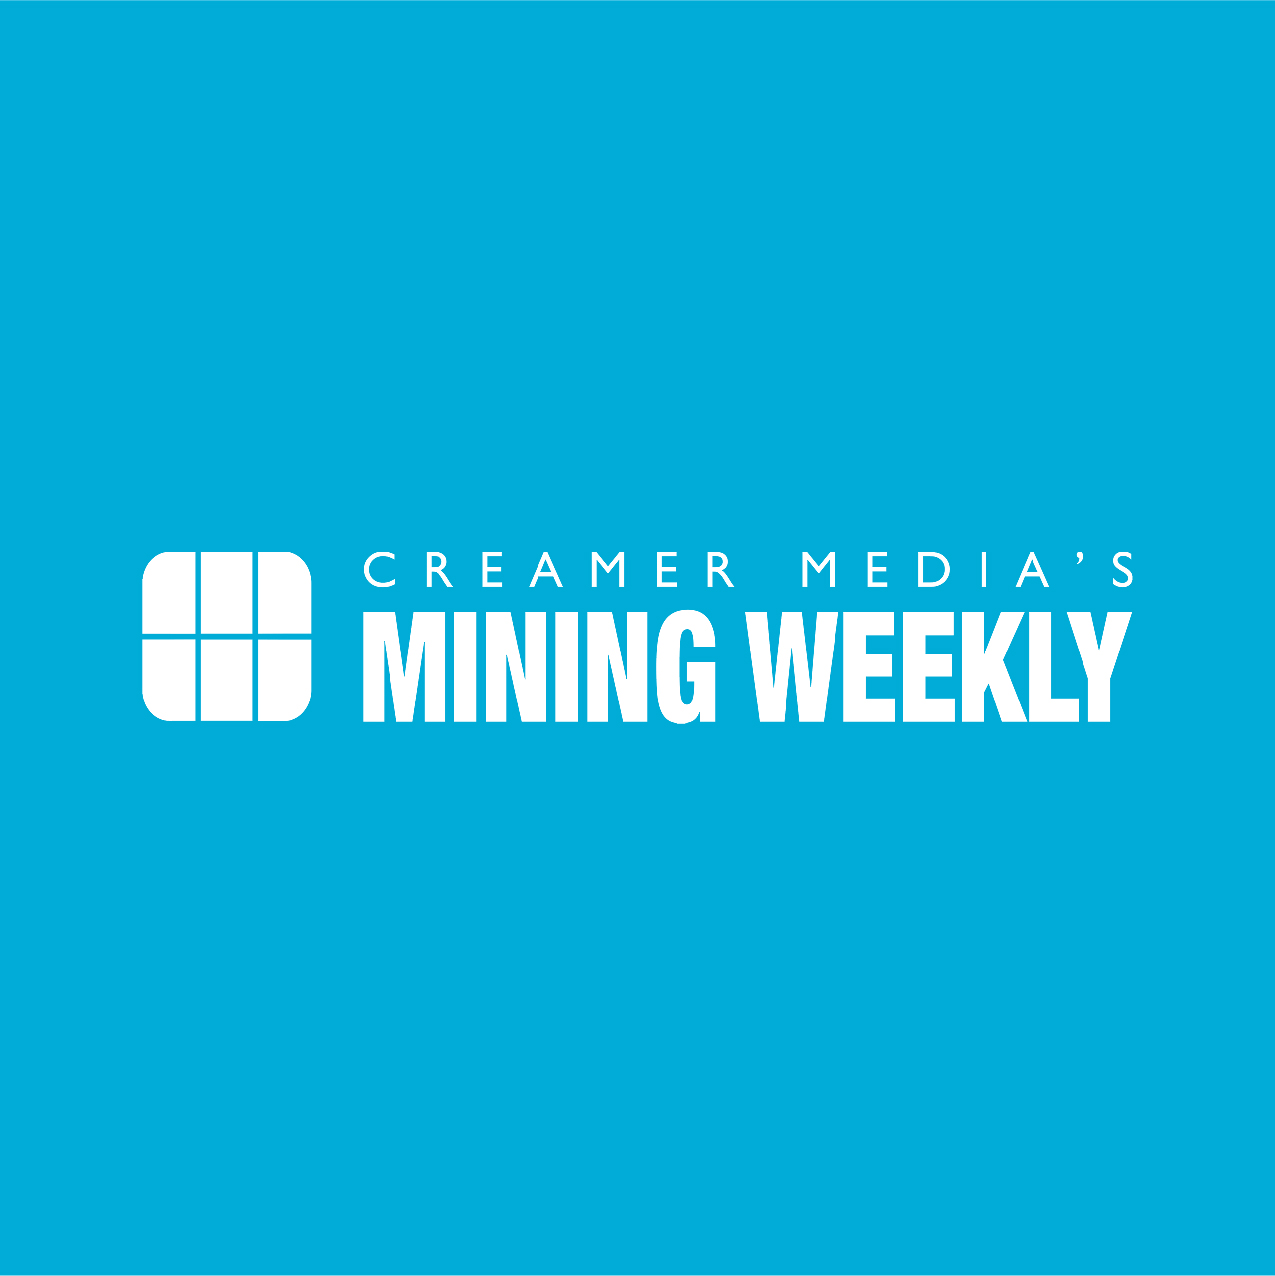 Mining Weekly: Copper shortages to hamper net-zero targets - report